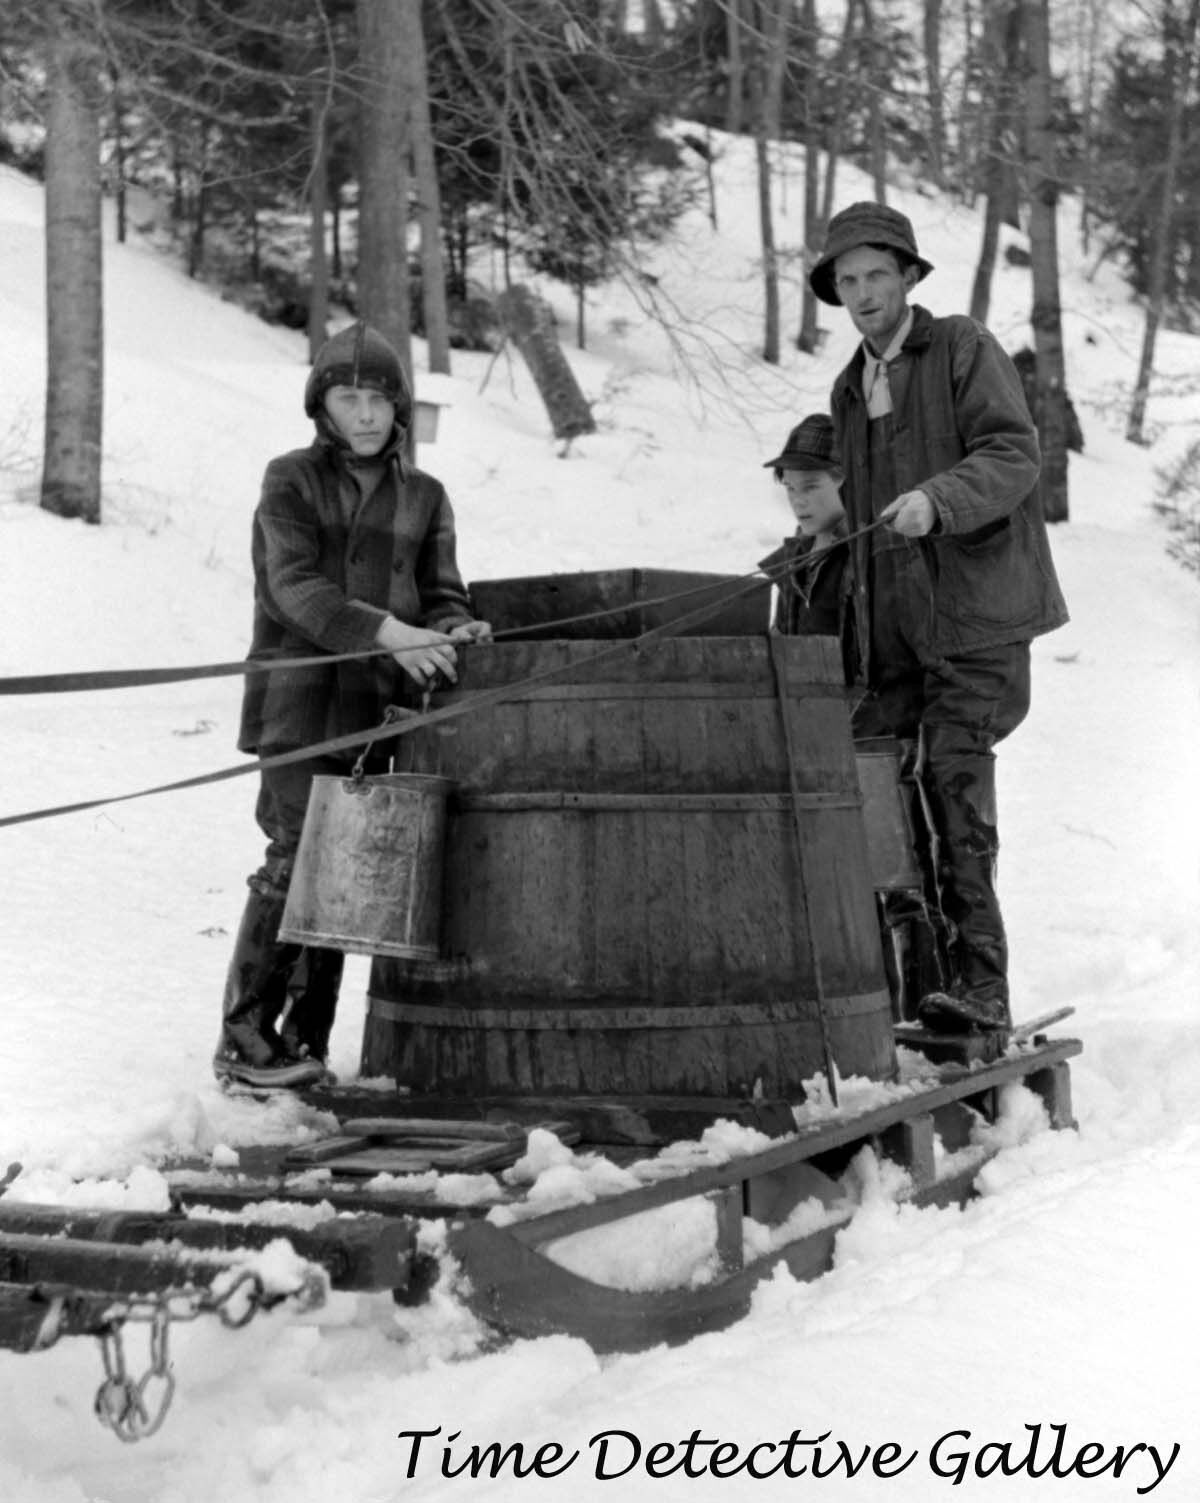 A Vat Full of Maple Sap for Syrup, Waitsfield VT -1940- Historic Photo Print